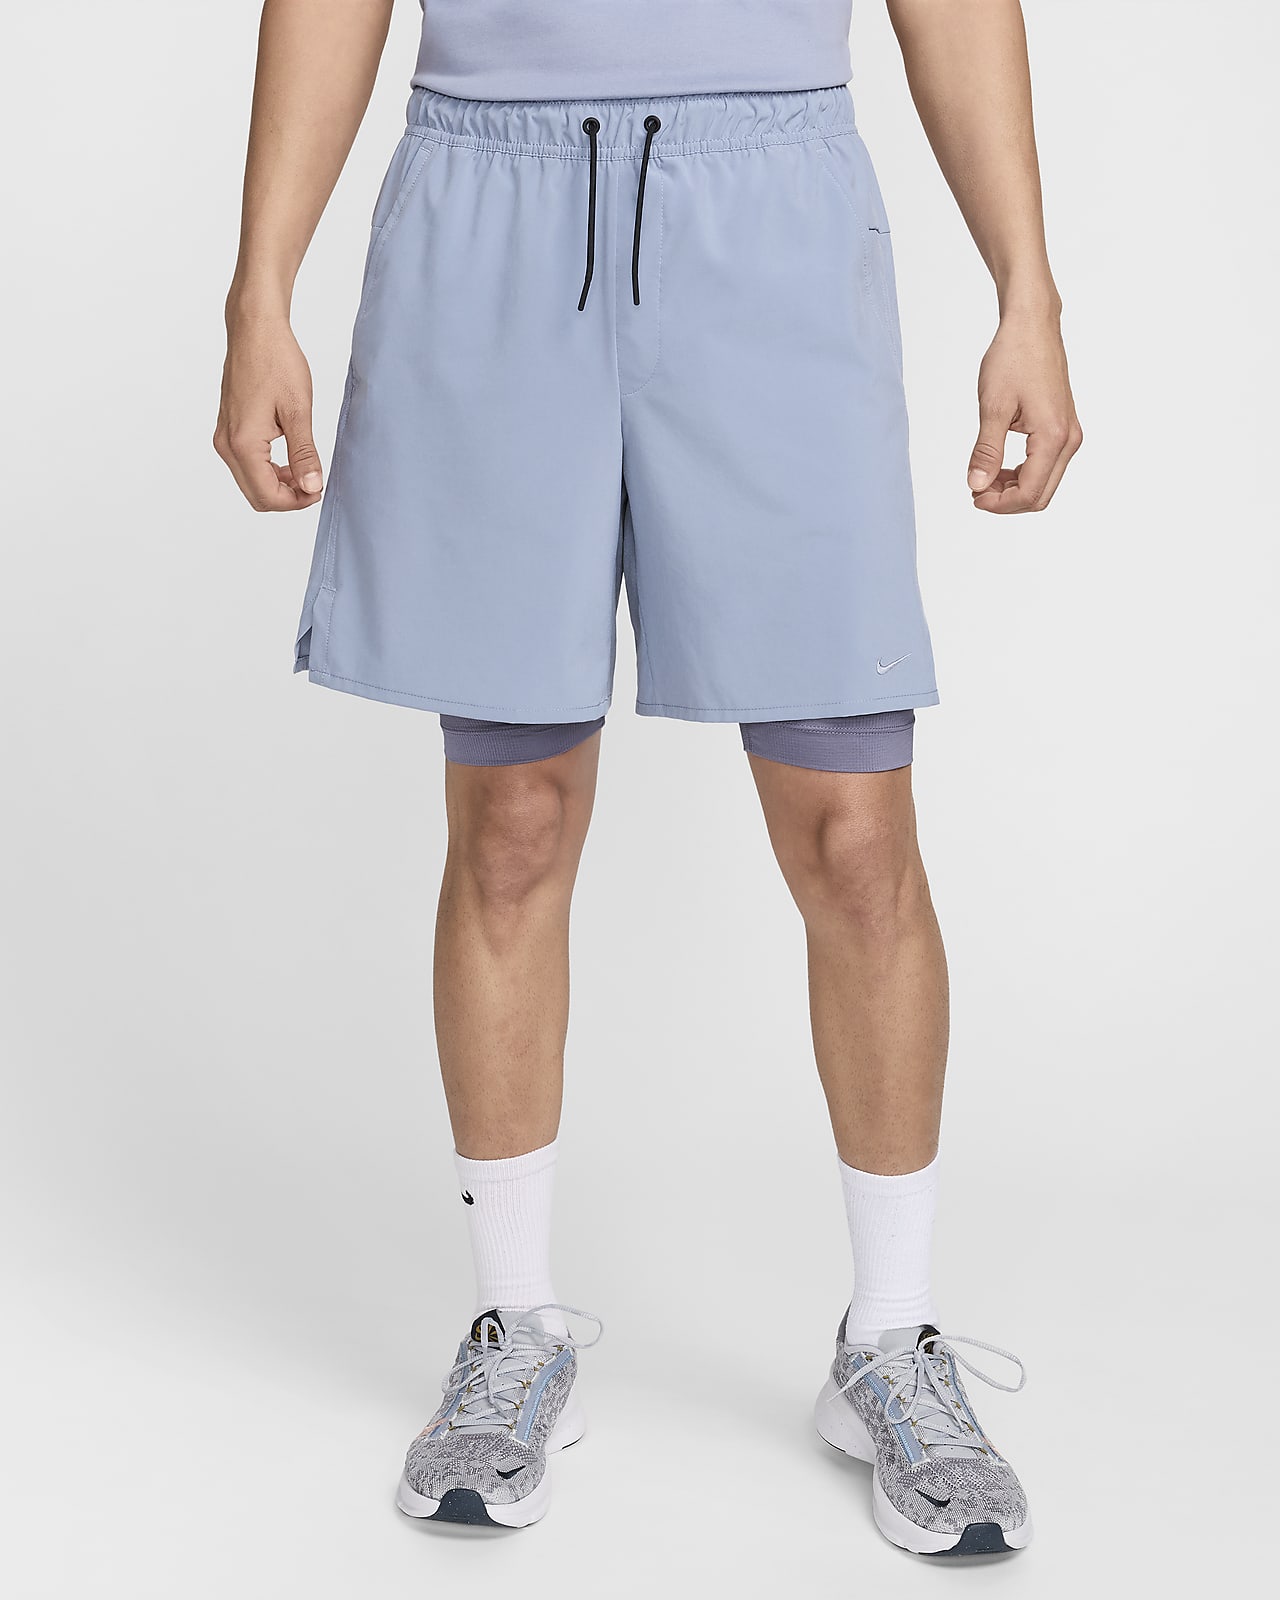 Under Armour - Men's UA Football 2-in-1 Shorts